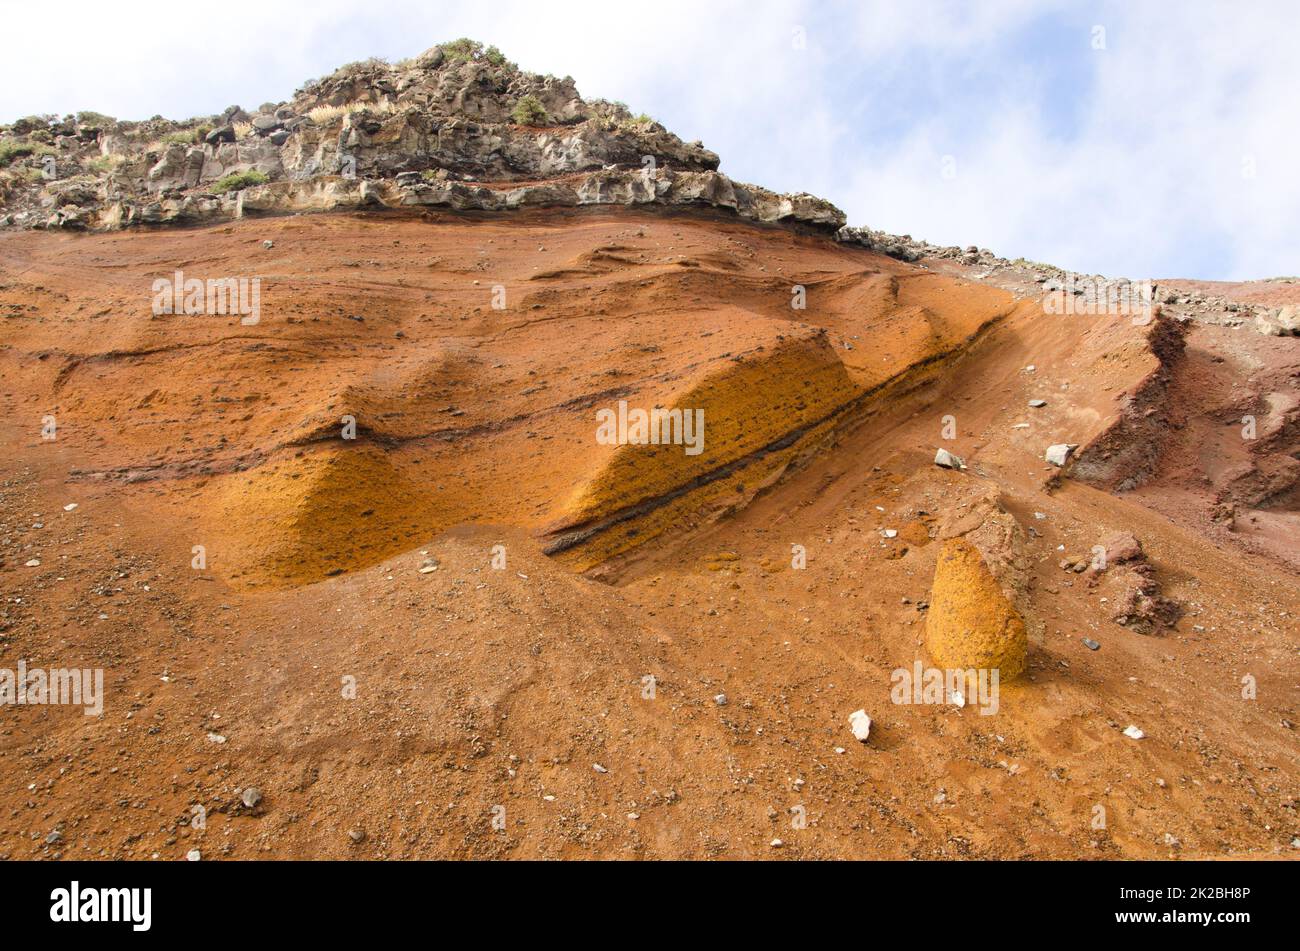 Hill with volcanic tuff and basaltic rock. Stock Photo